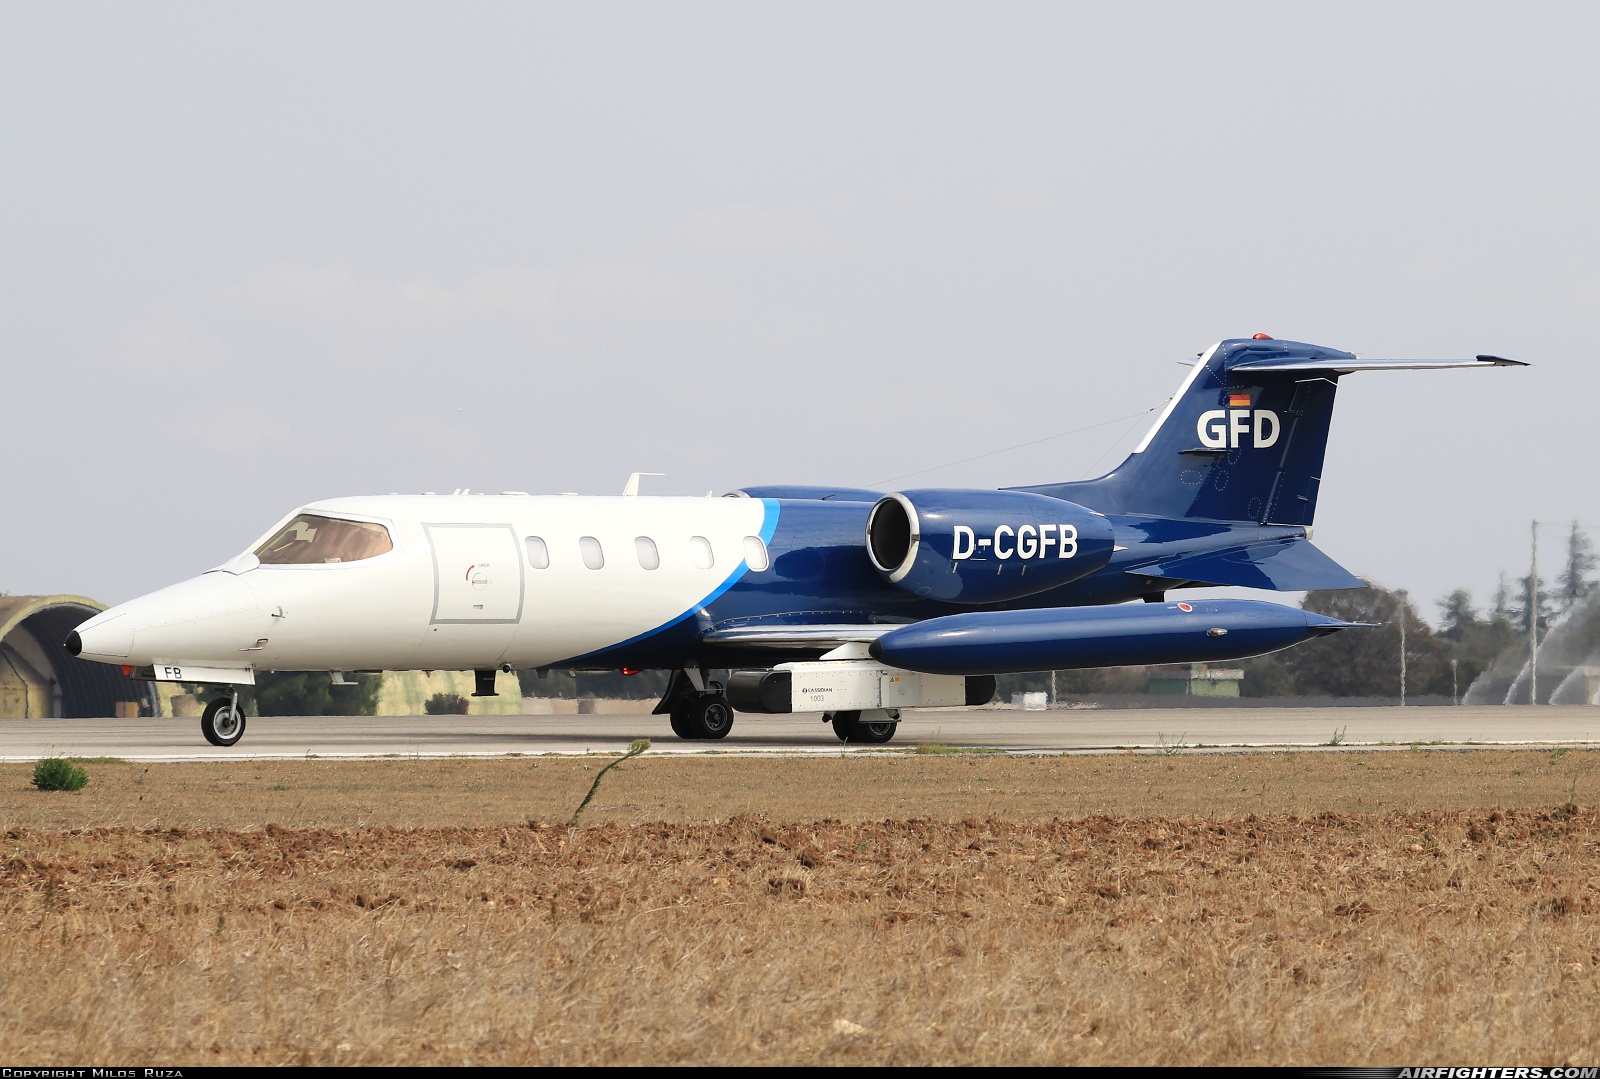 Company Owned - GFD Learjet 35A D-CGFB at Gioia del Colle-Bari (LIBV), Italy